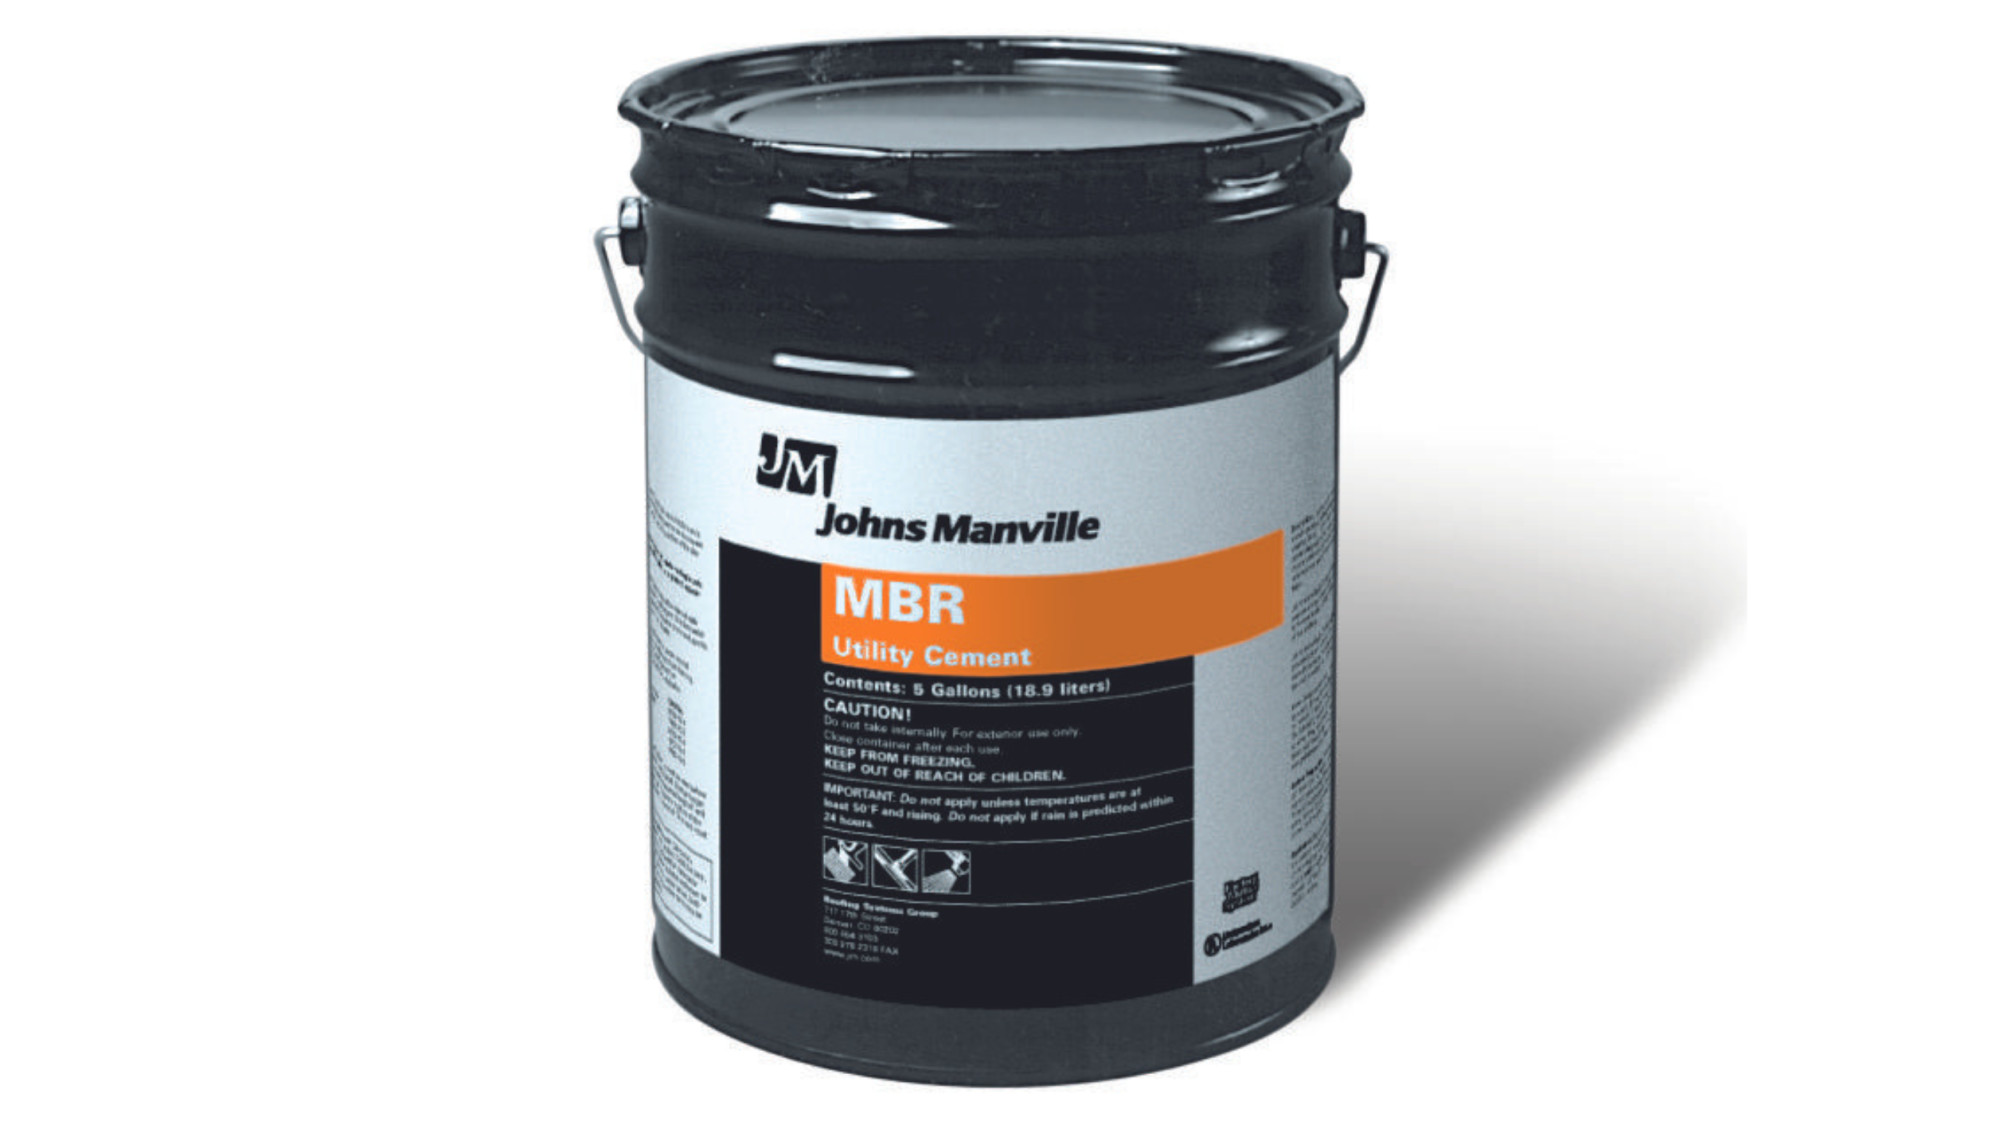 MBR® Utility Cement